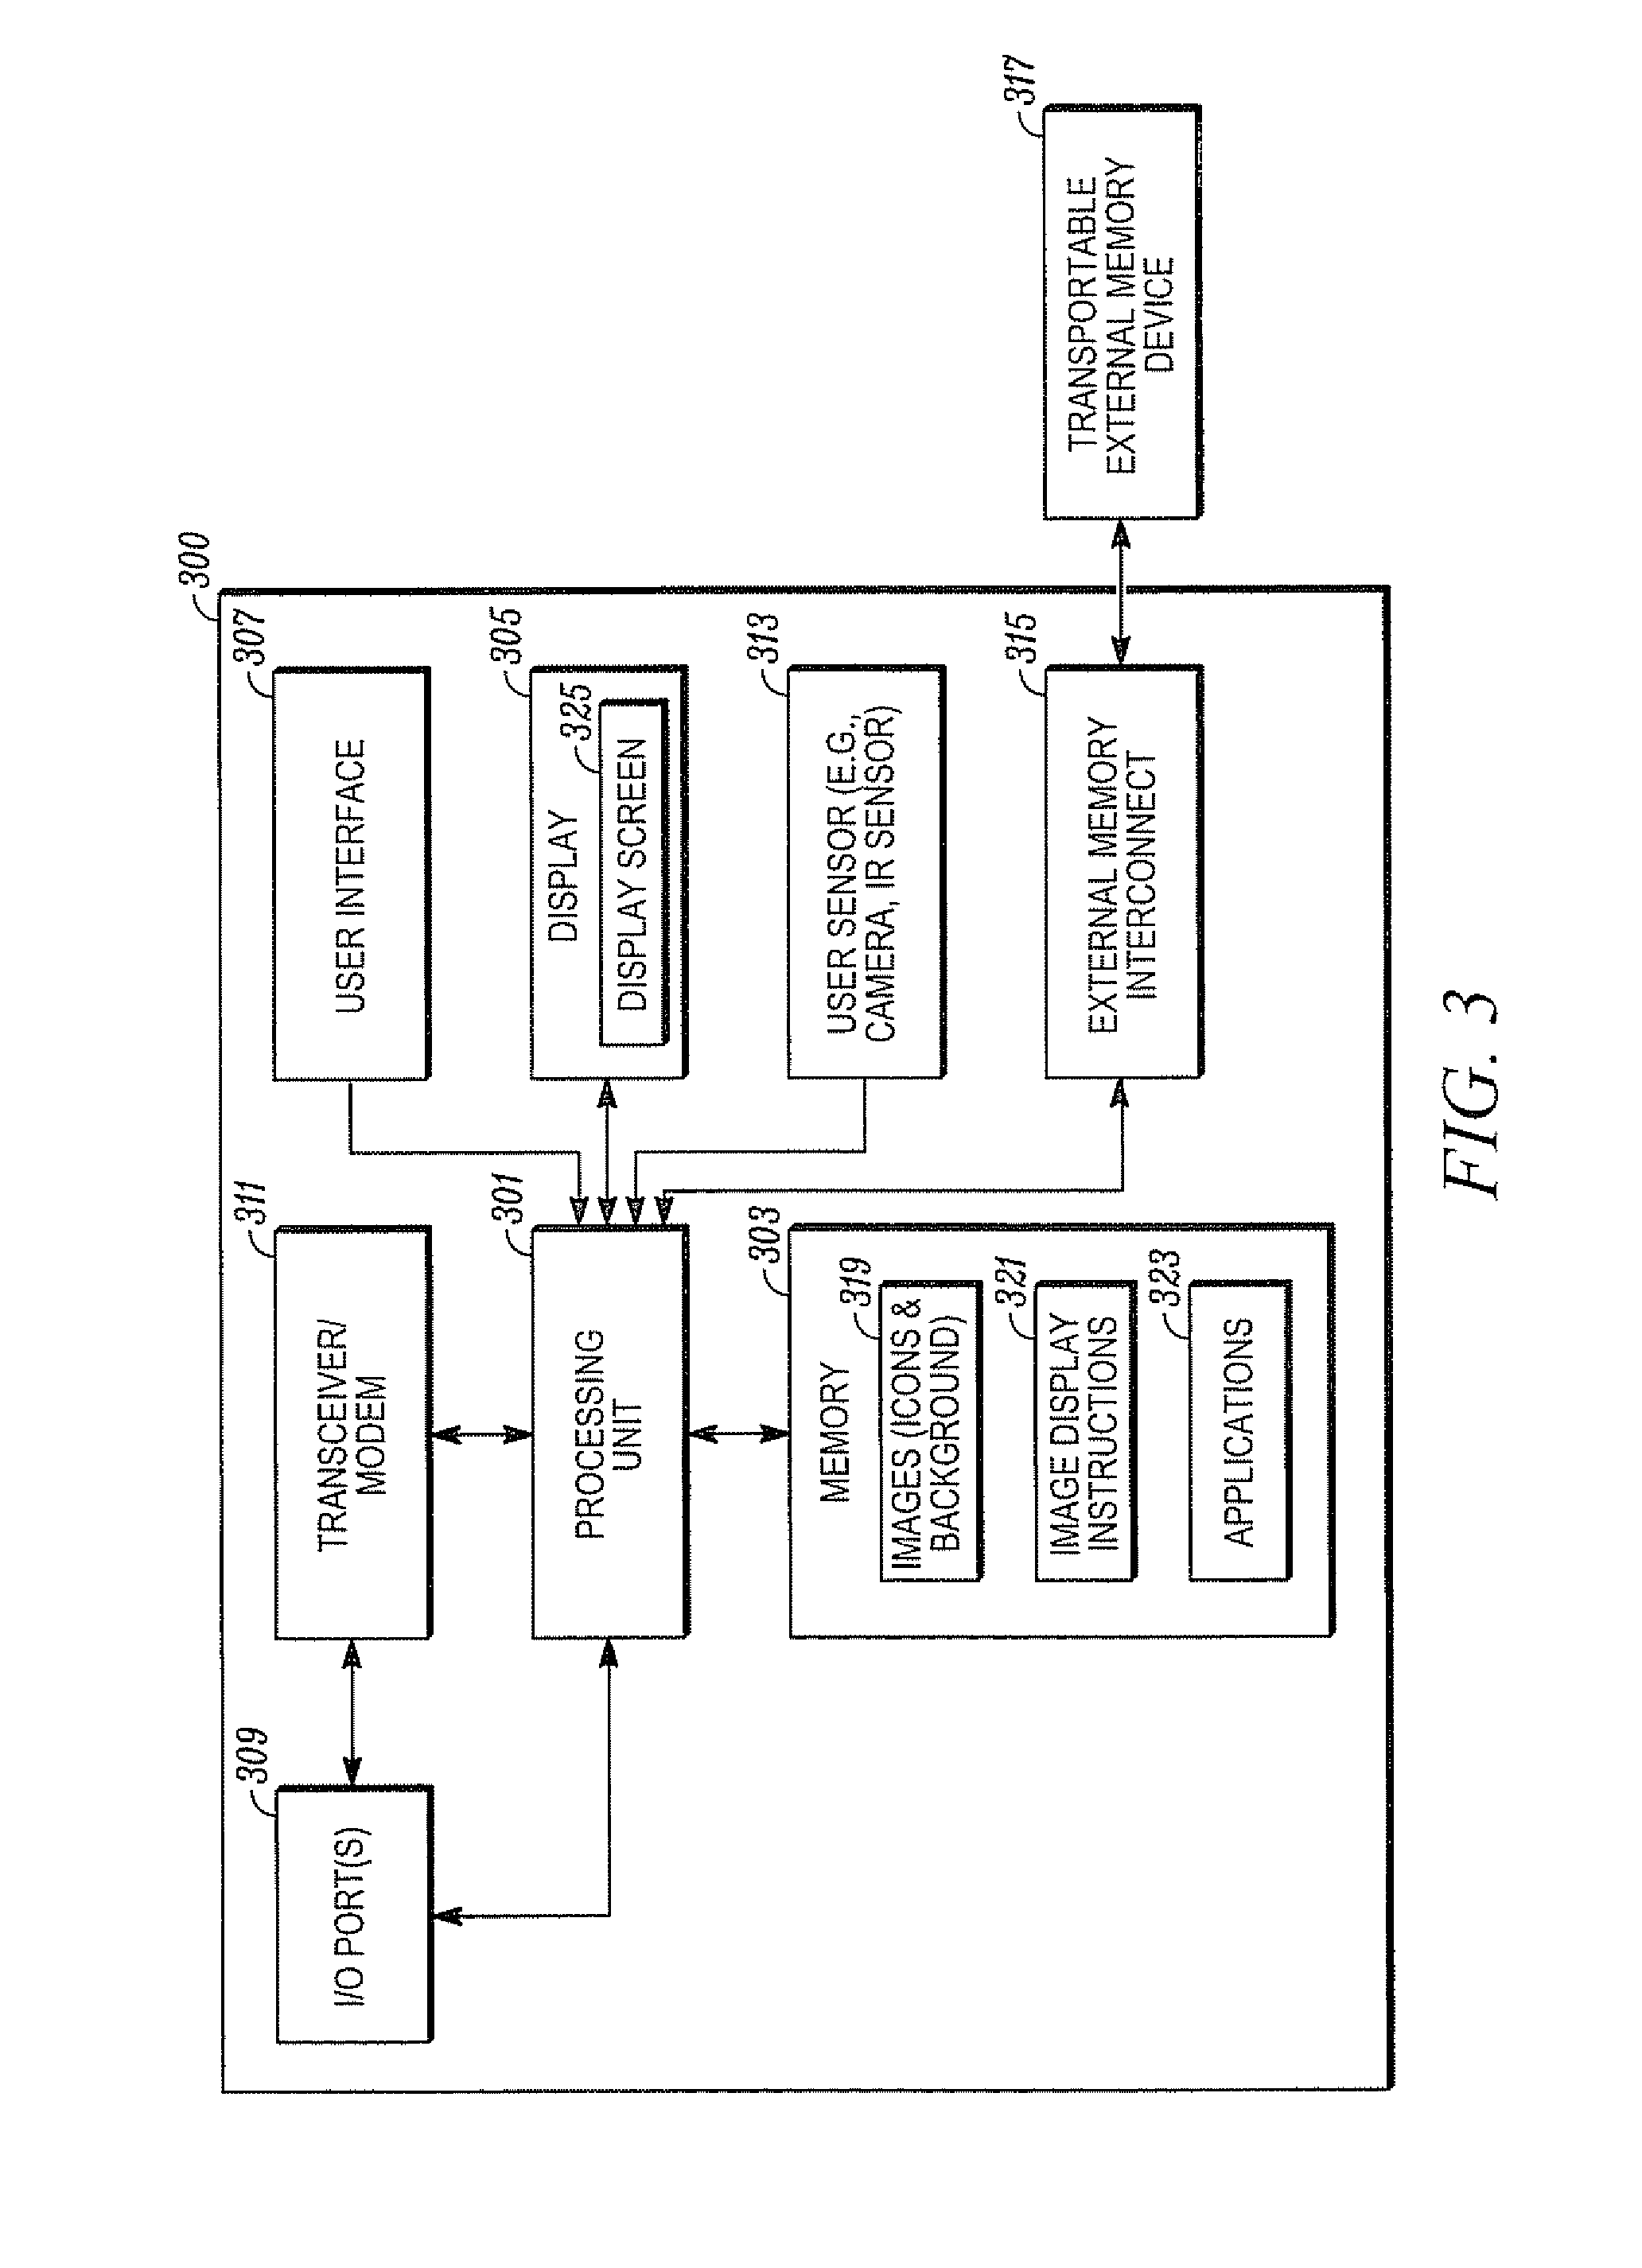 Electronic device and method for displaying a background setting together with icons and/or application windows on a display screen thereof